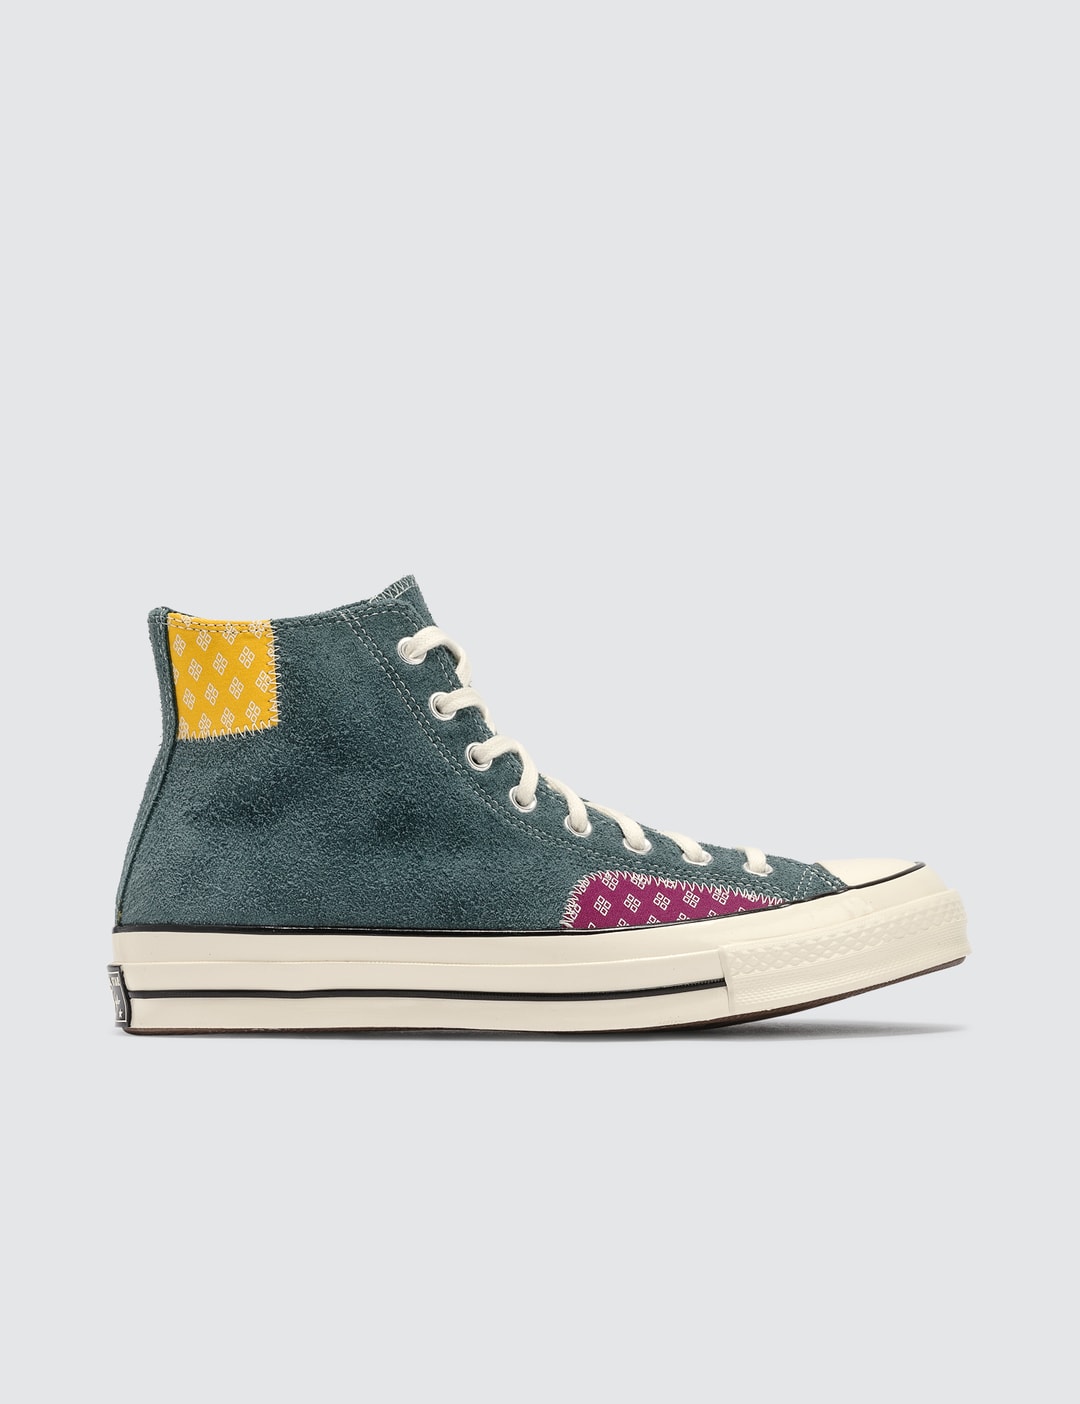 Enseñando Noreste Gimnasta Converse - Chuck 70 Hi Patchwork | HBX - Globally Curated Fashion and  Lifestyle by Hypebeast